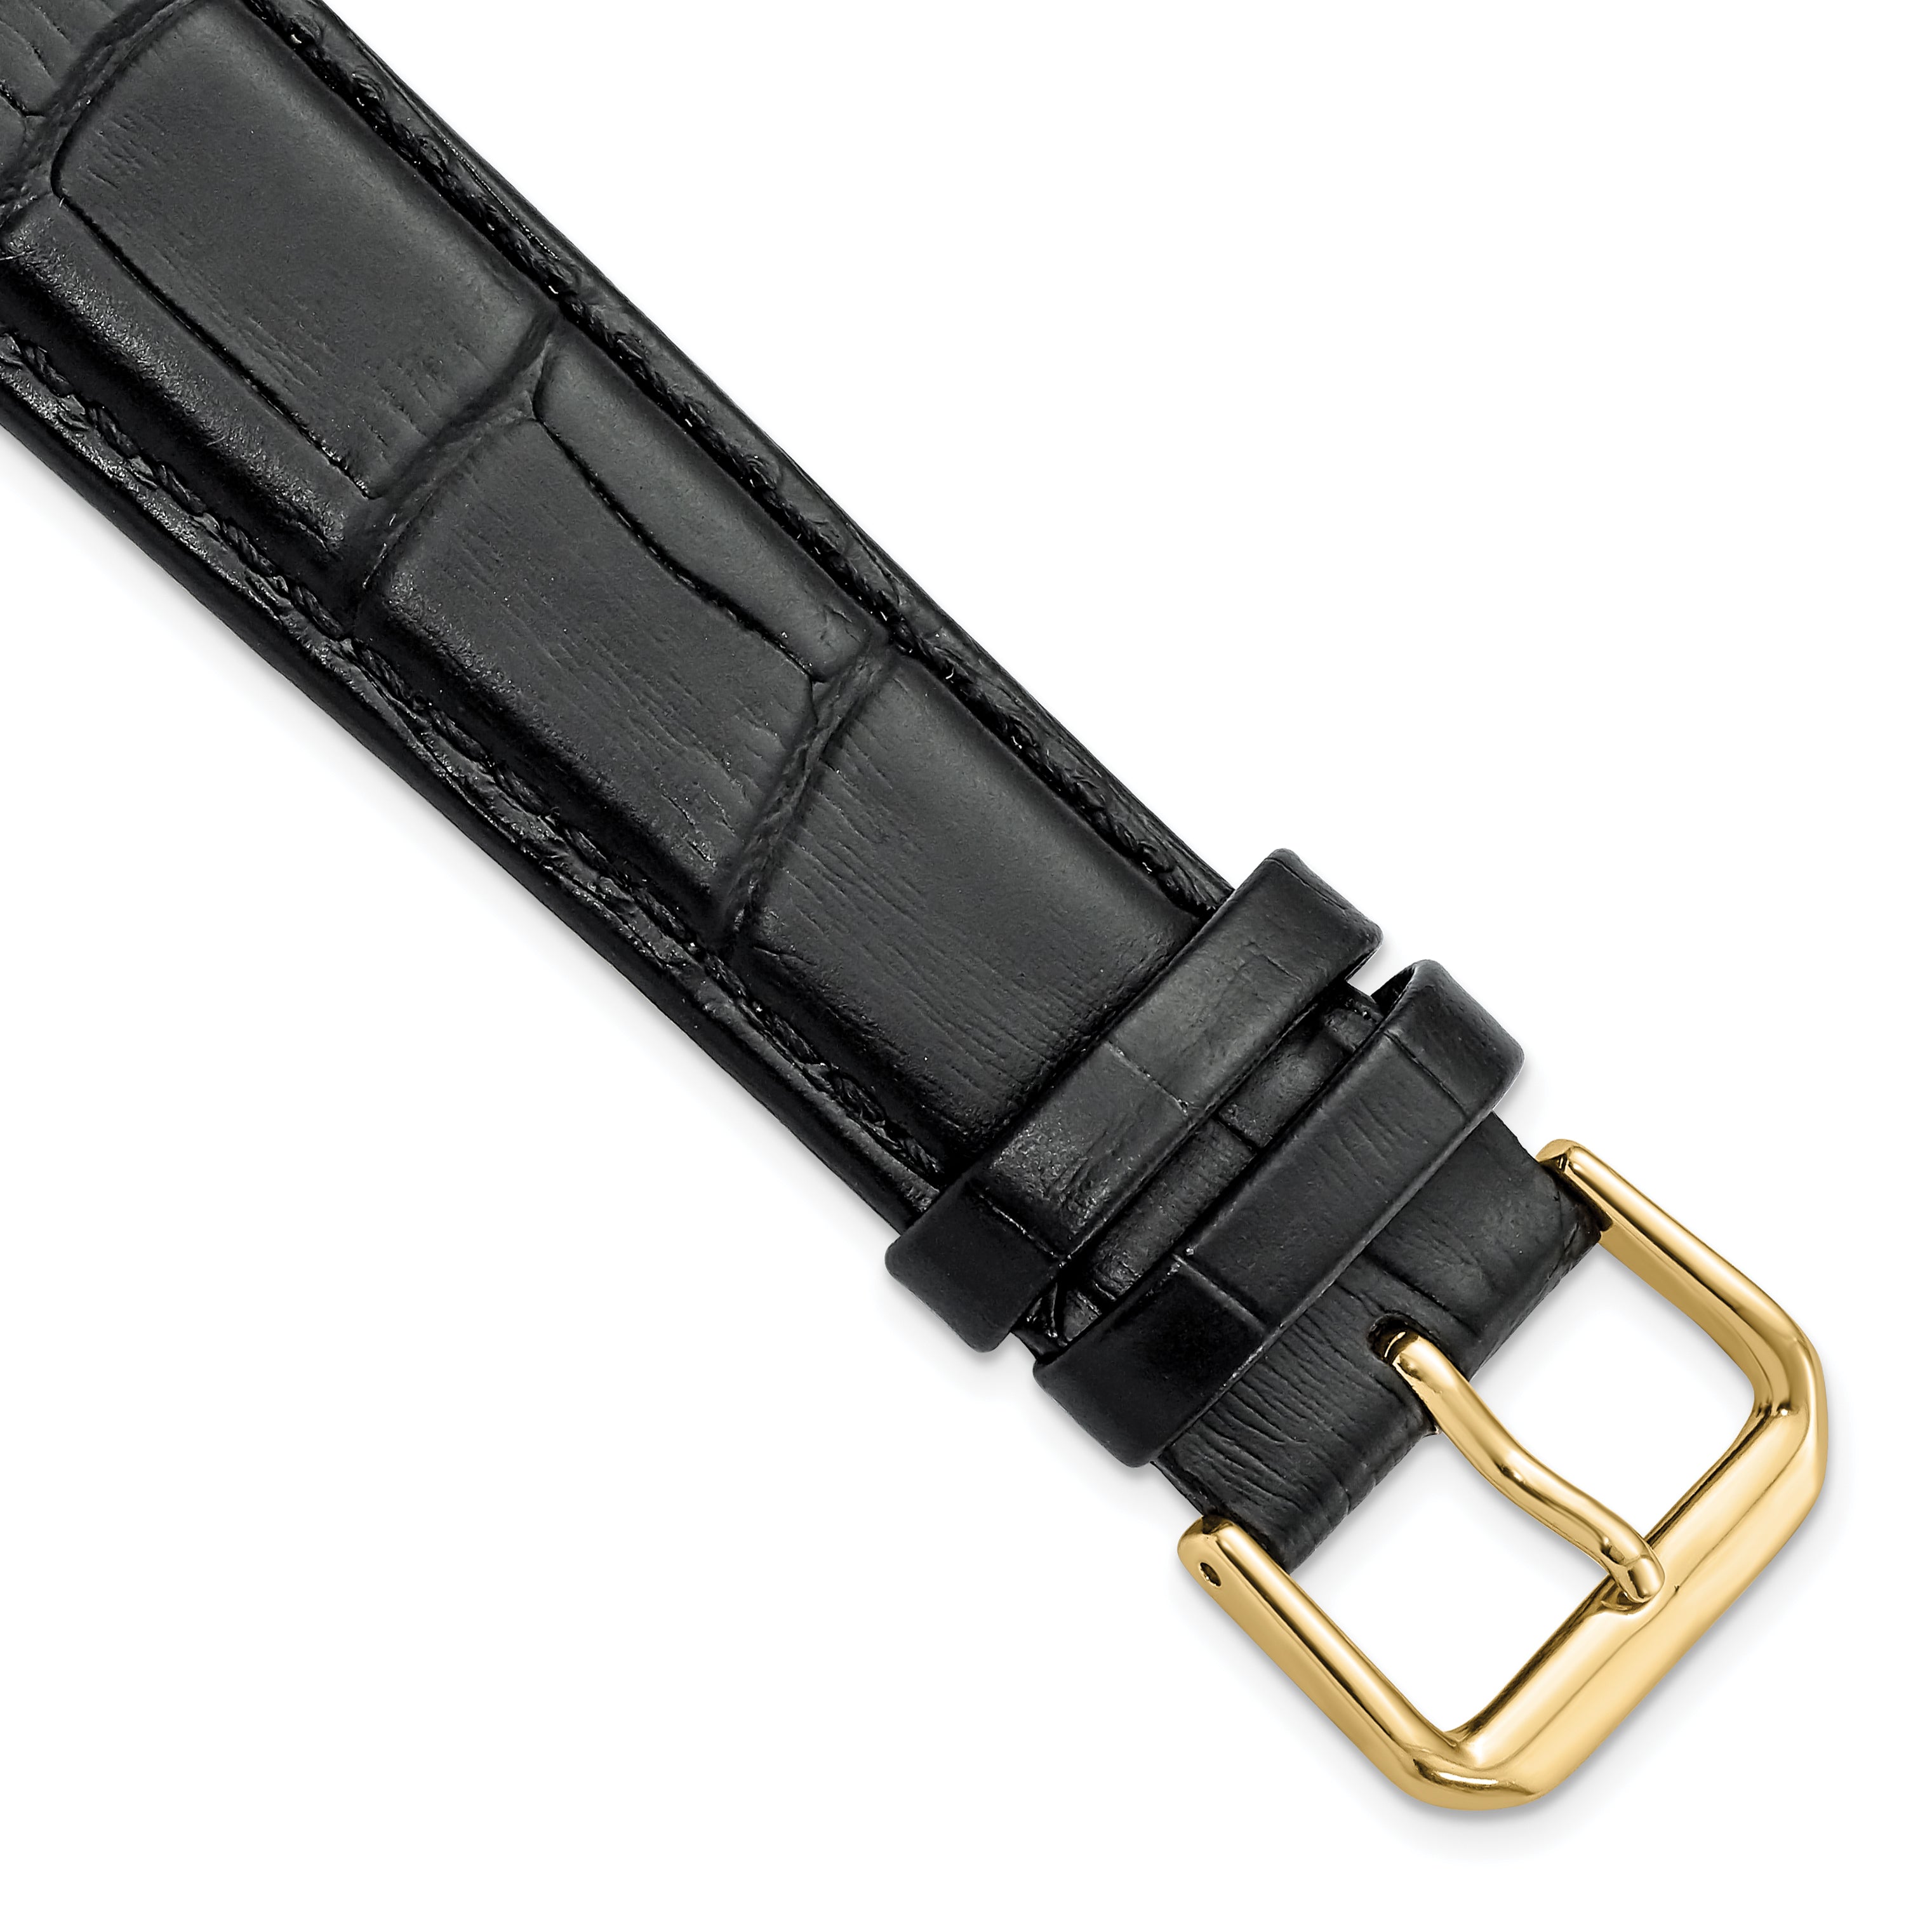 DeBeer 20mm Black Matte Wild Alligator Grain Leather with Gold-tone Buckle 7.5 inch Watch Band